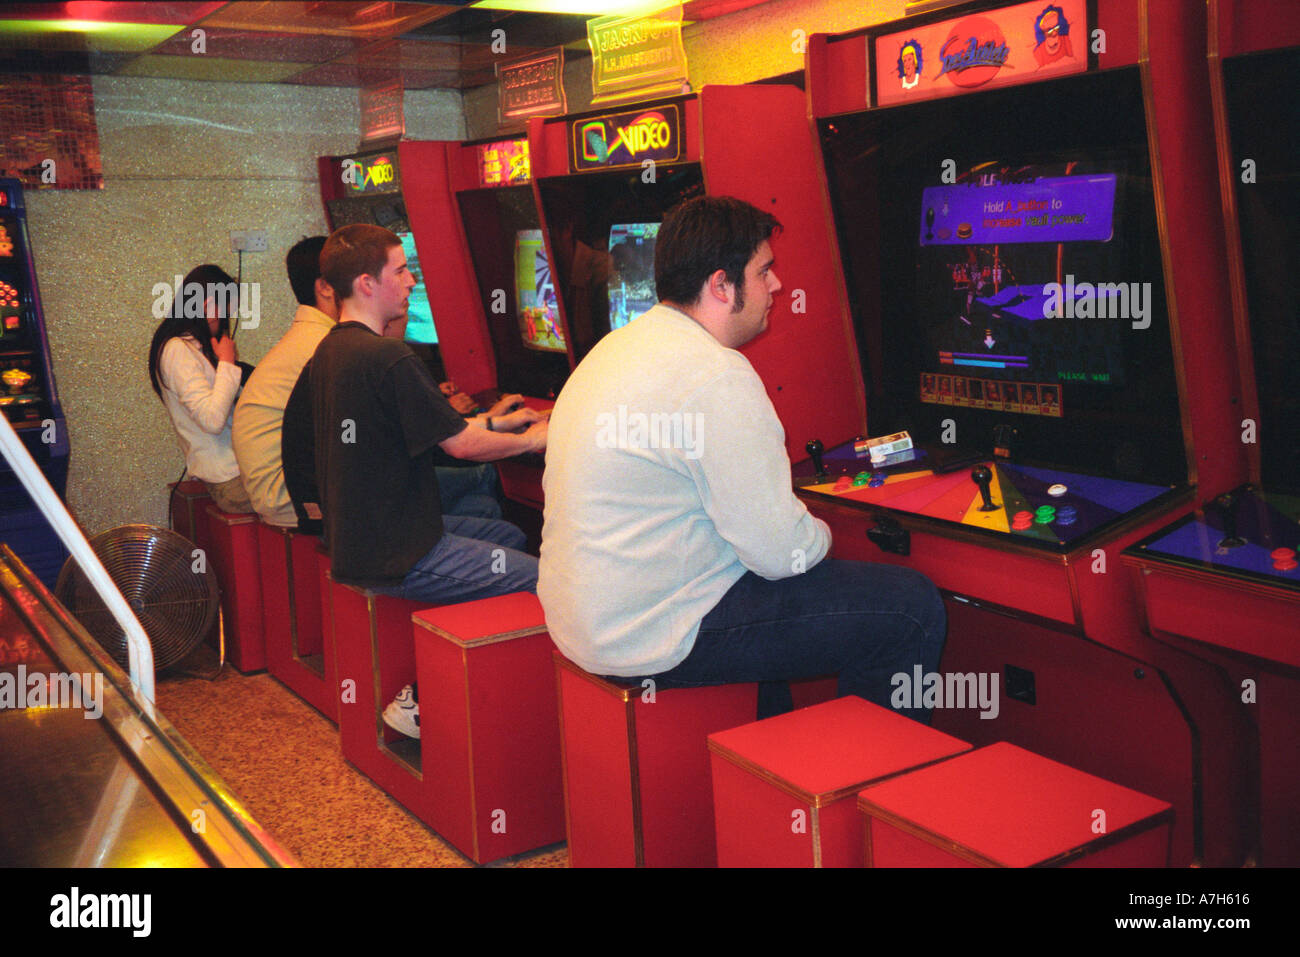 Young people playing on the games machines in amusement arcade. Stock Photo